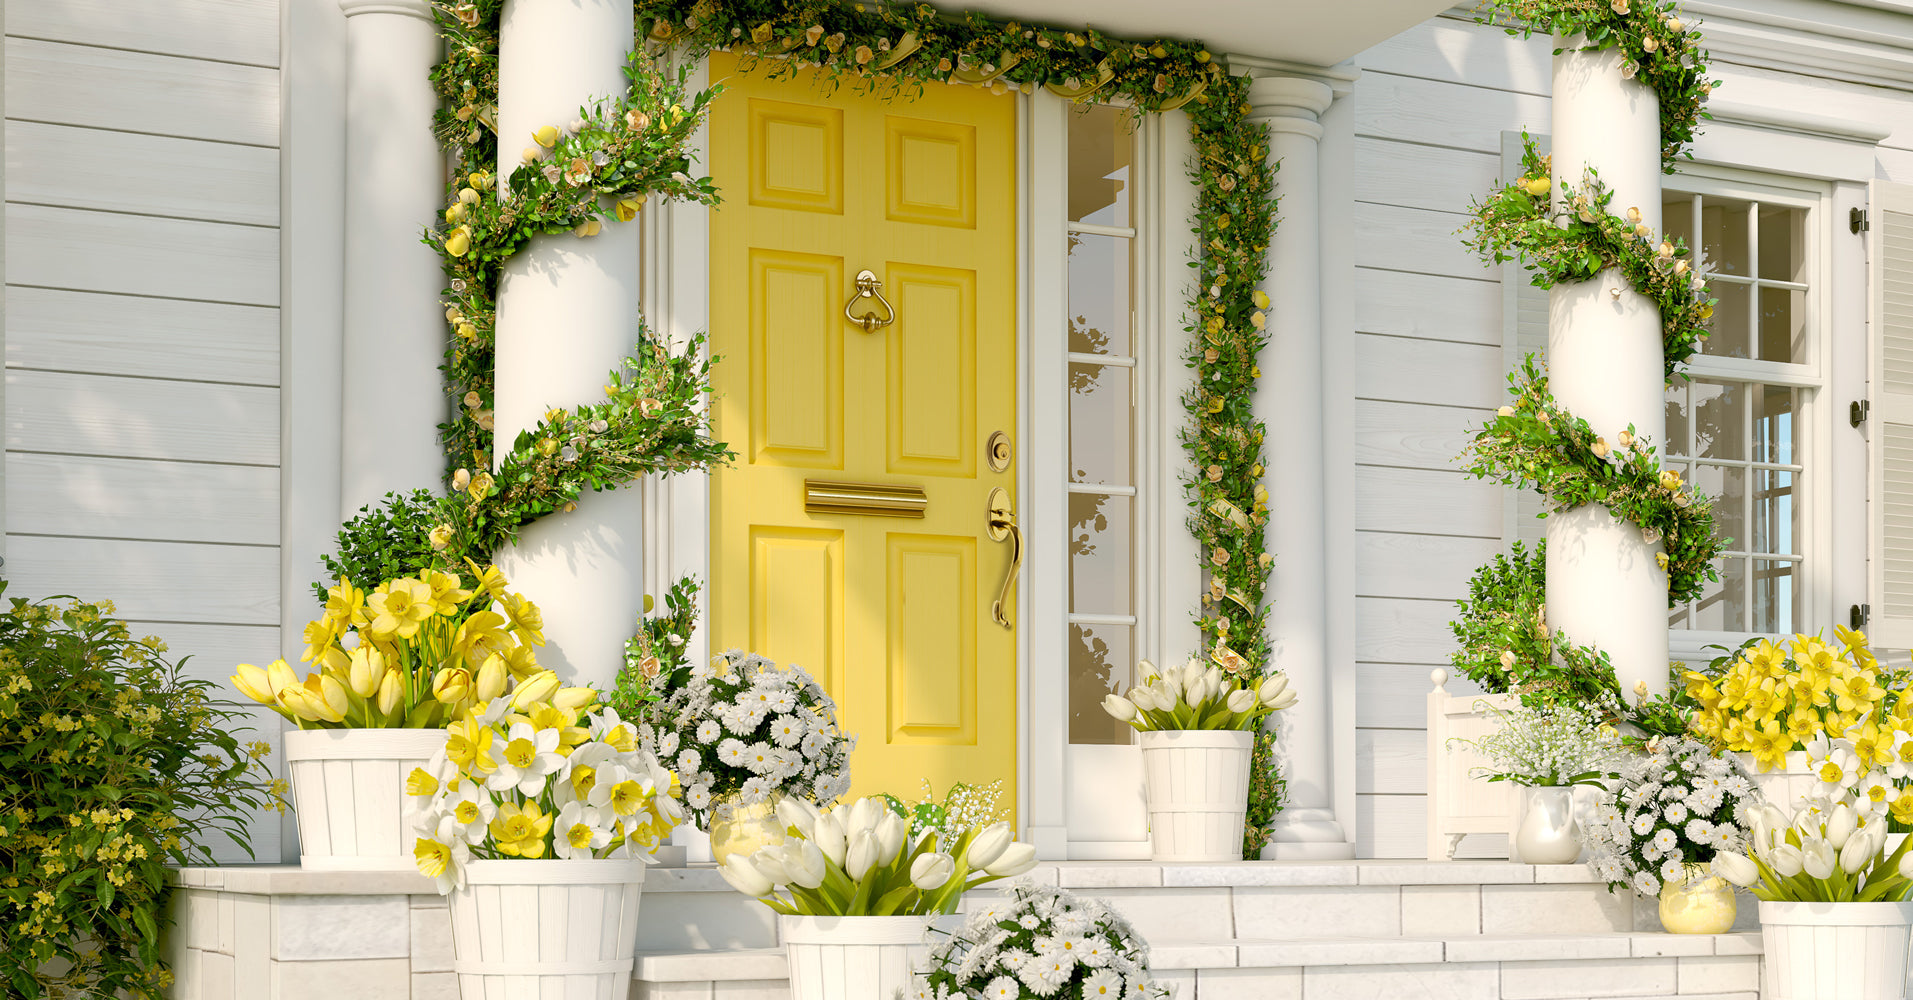 Easy Ways to Boost Your Curb Appeal